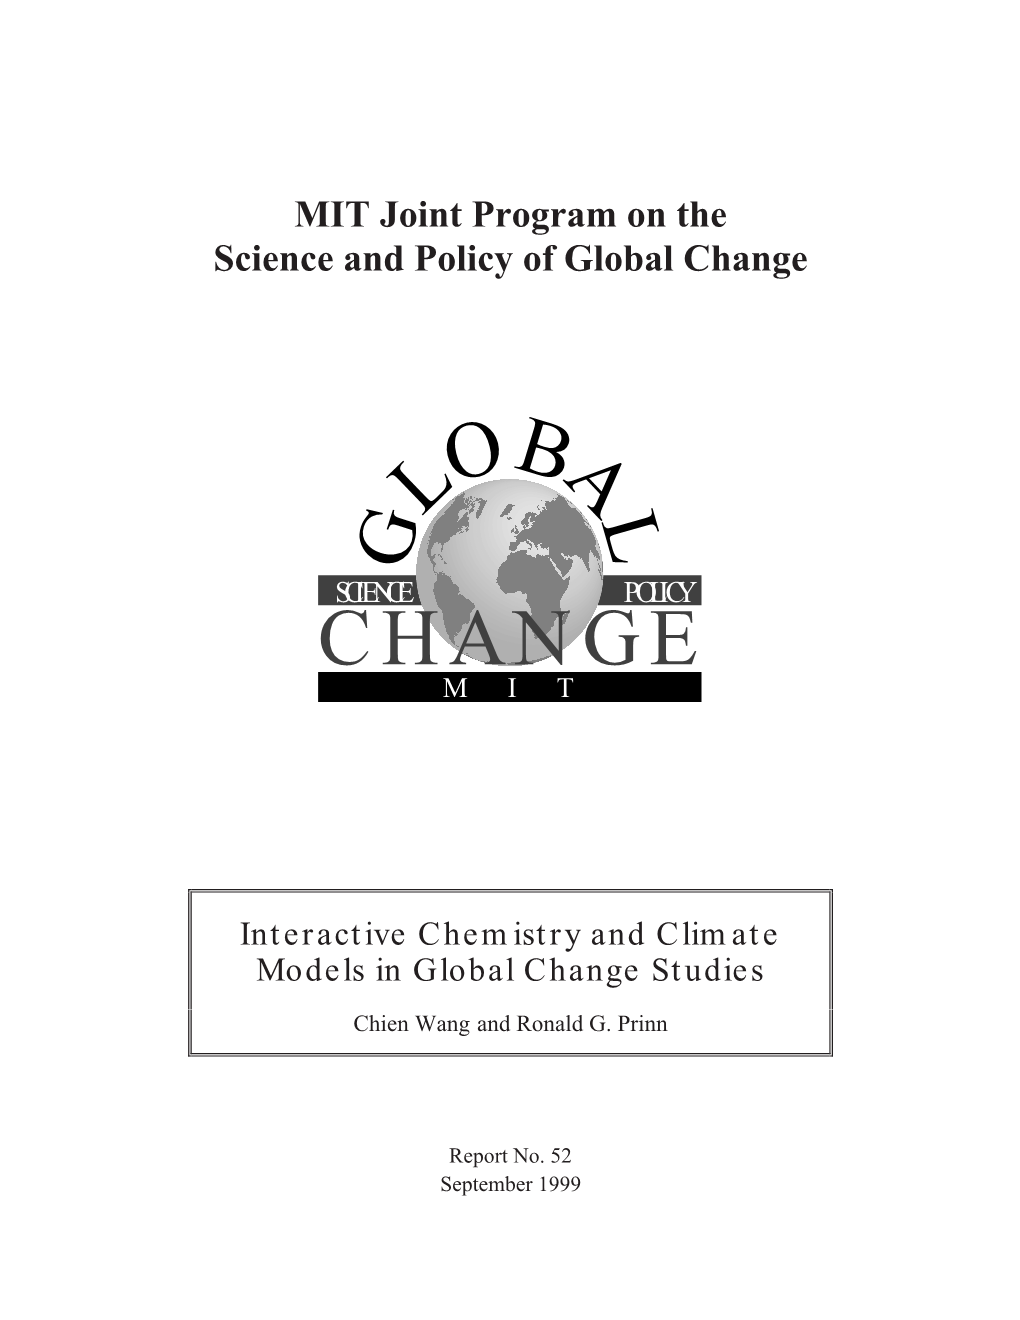 Interactive Chemistry and Climate Models in Global Change Studies